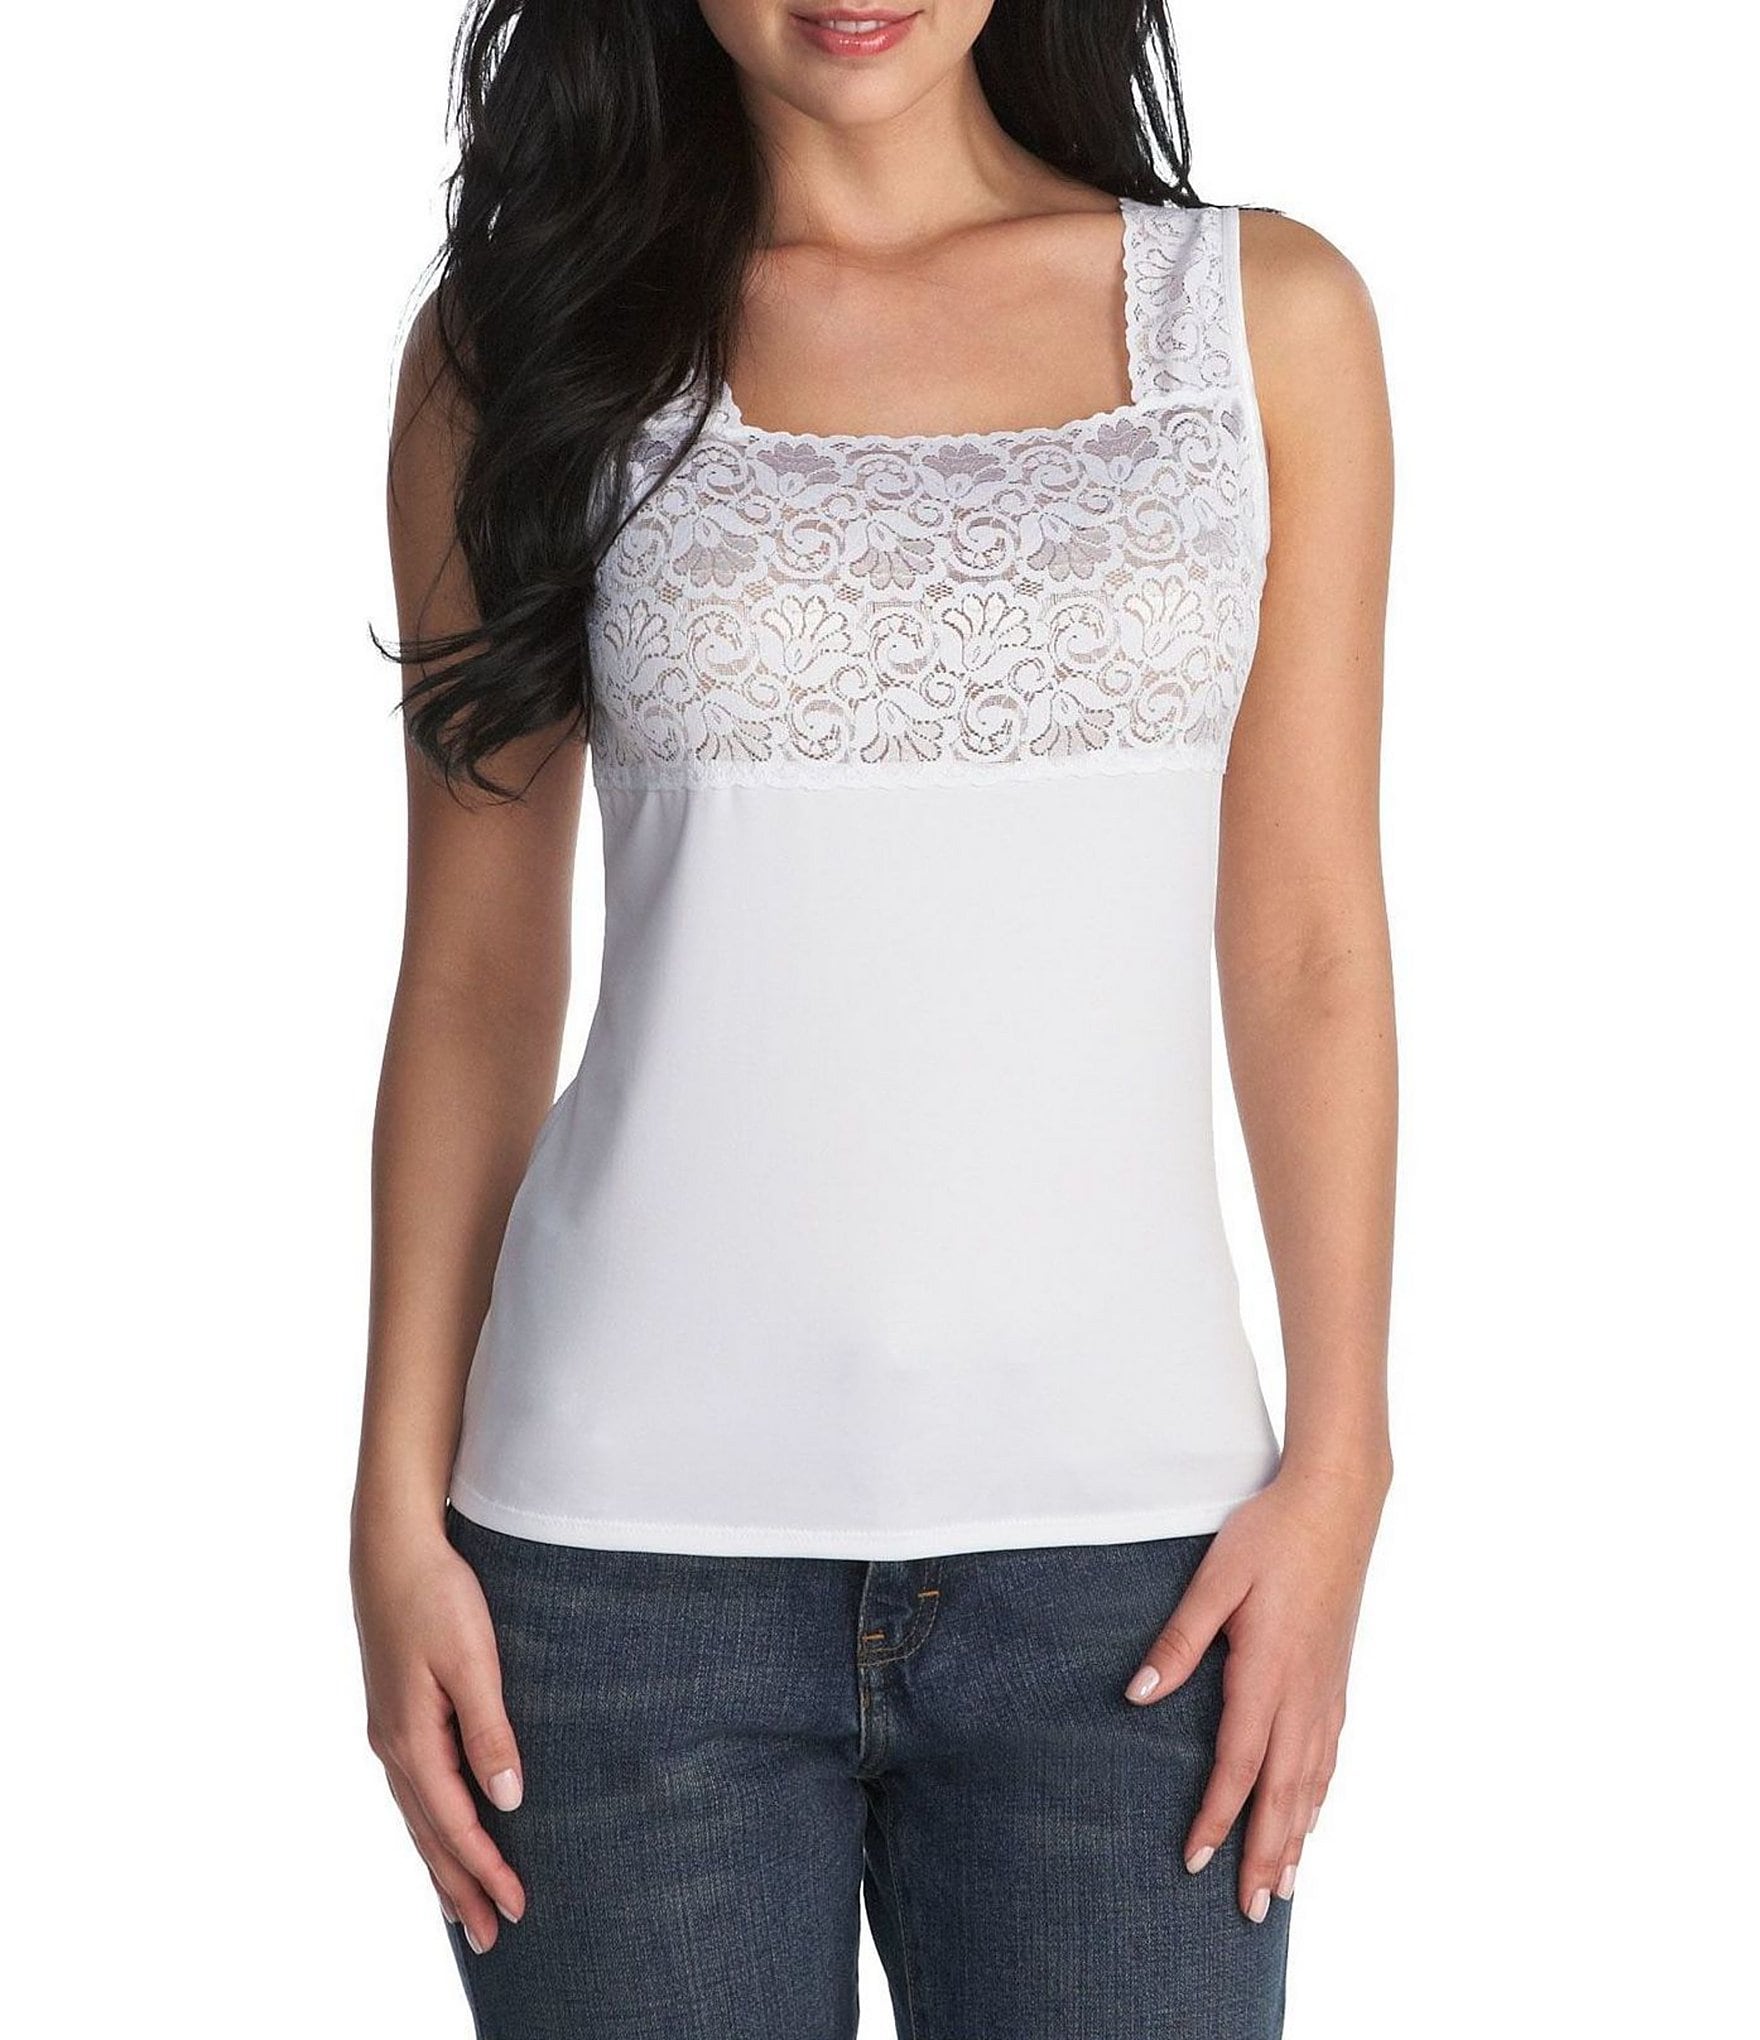 Sheer Lace Camisole 484731